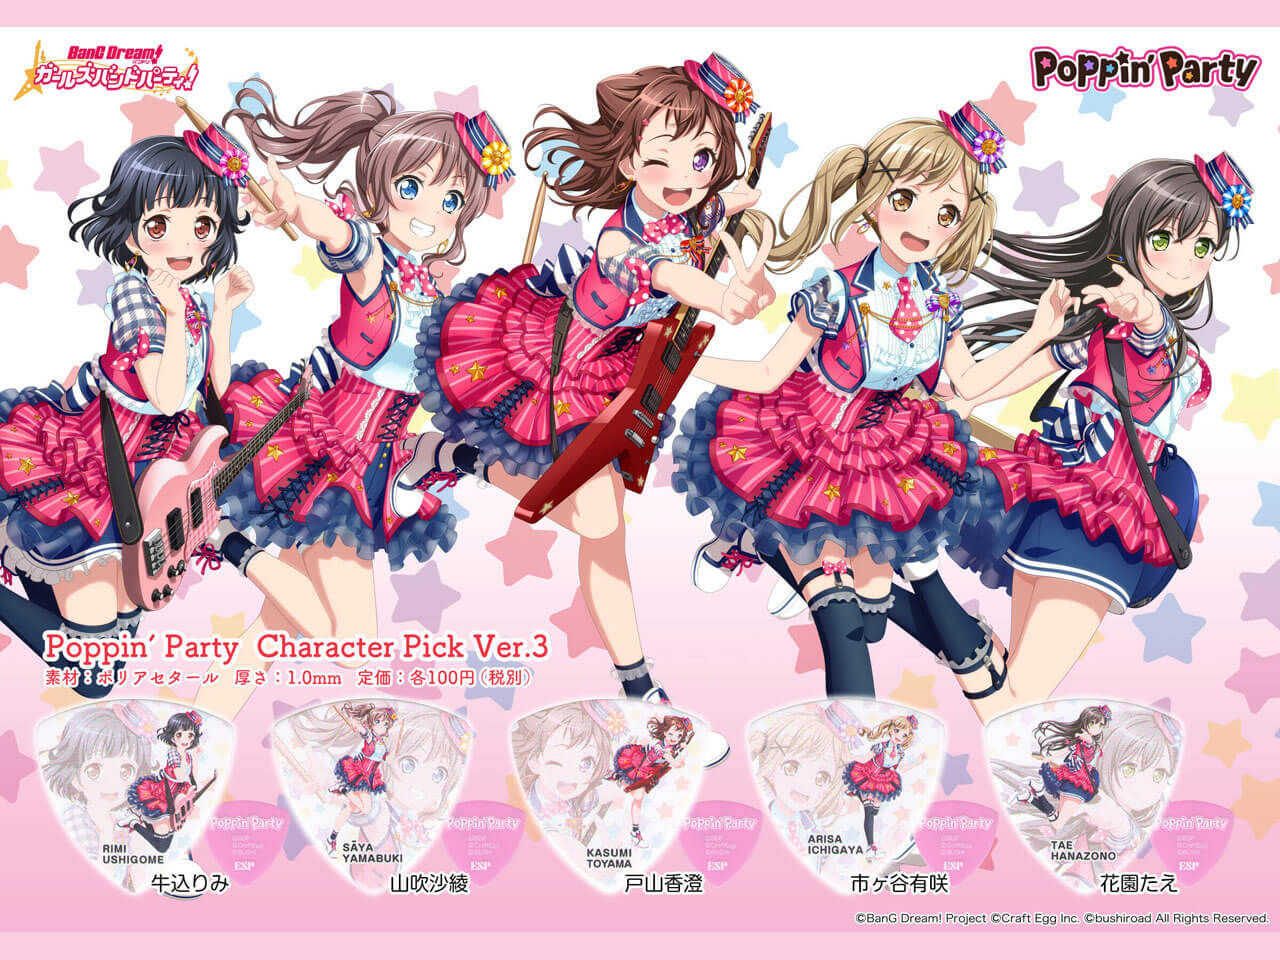 【ESP×BanG Dream!コラボピック】Poppin’Party Character Pick Ver.3 "戸山香澄"（GBP Kasumi Poppin Party 3）＆”ハメパチ” セット